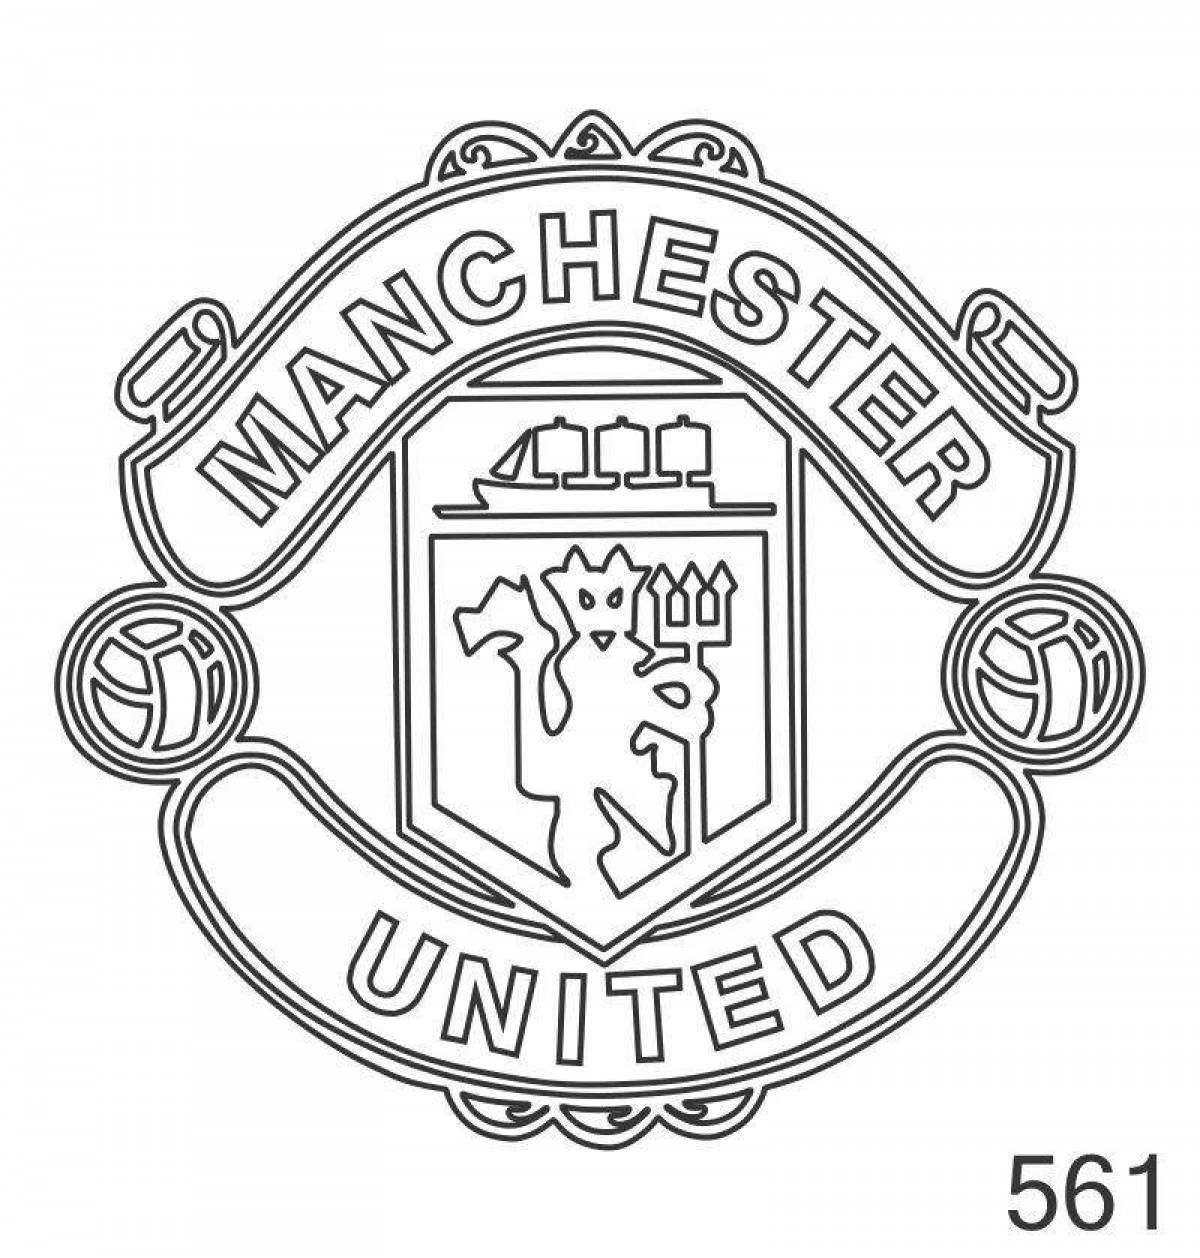 Exciting Manchester City coloring page